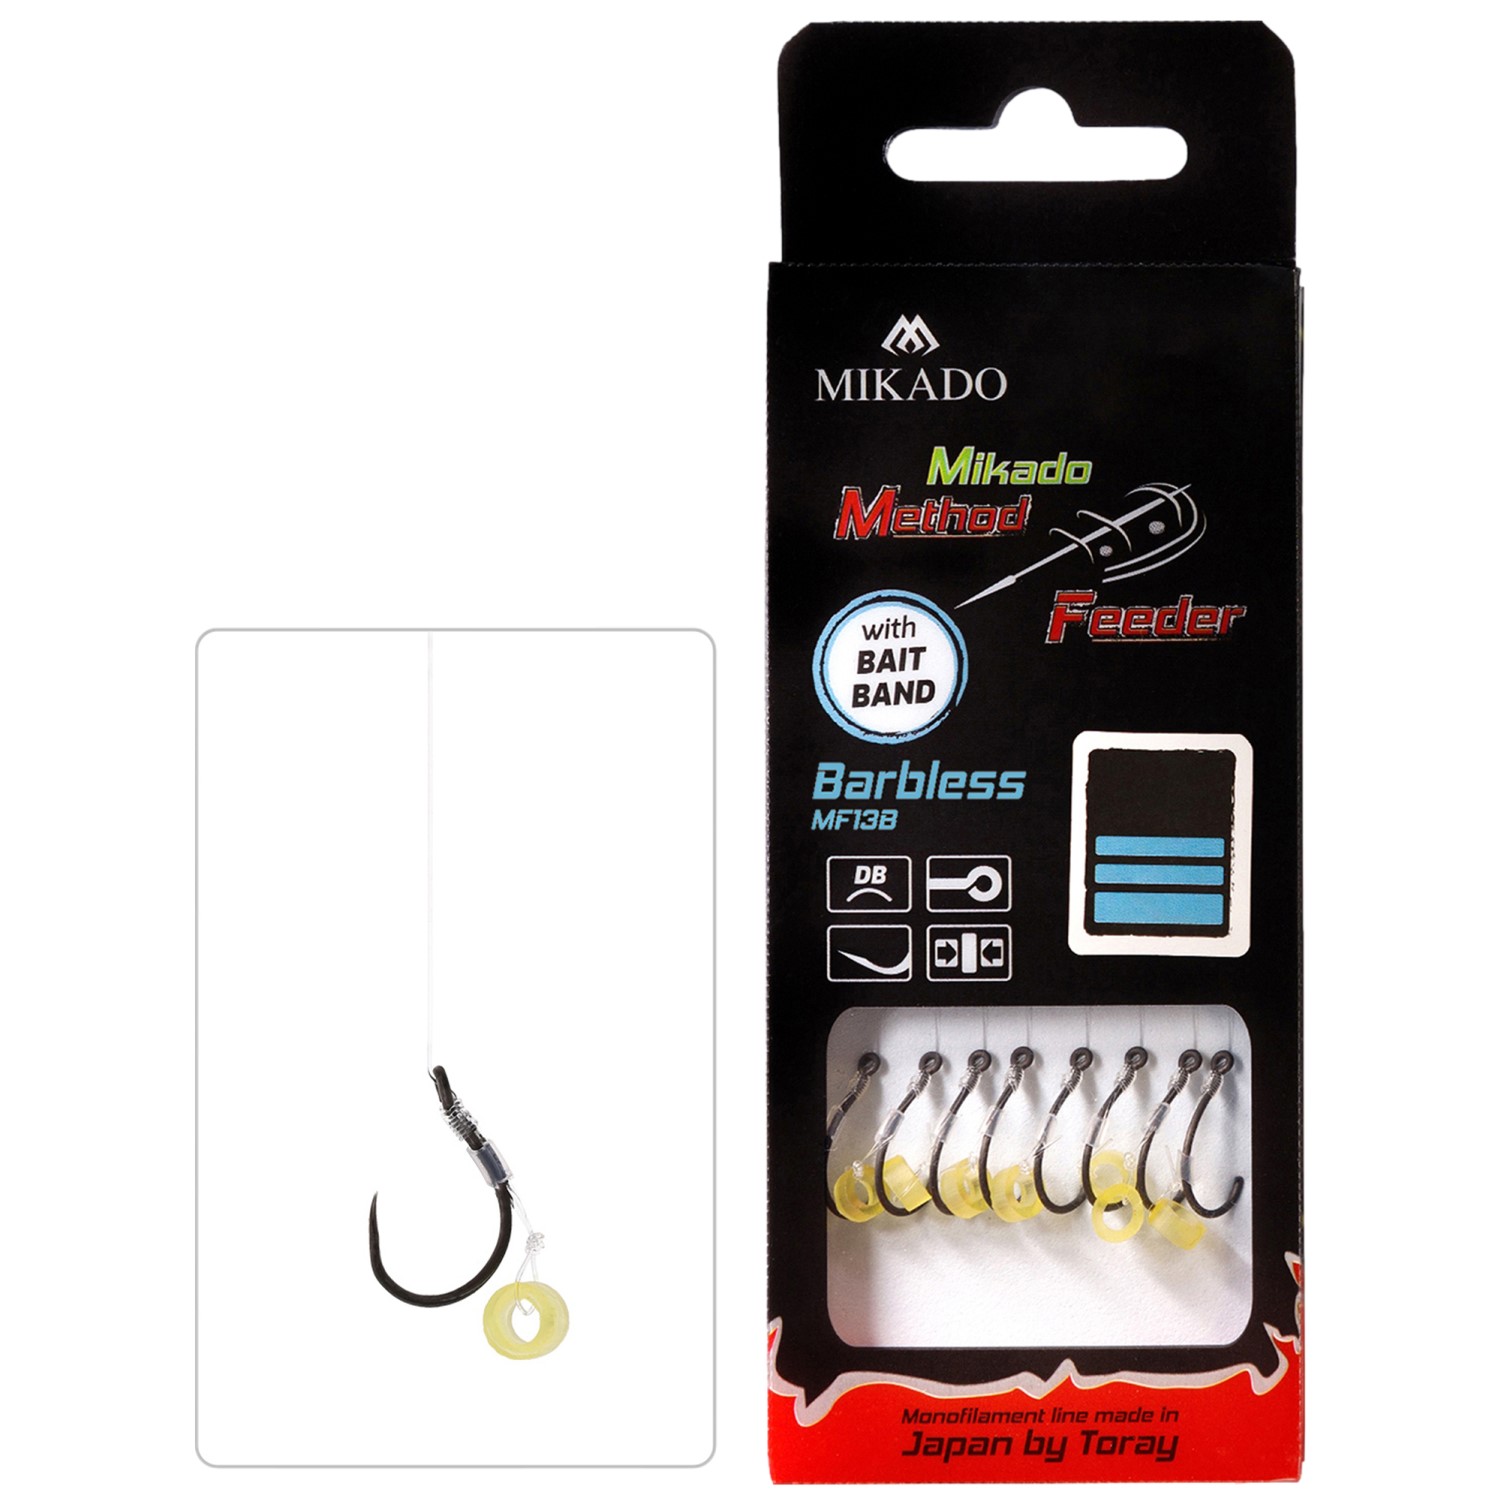 Mikado Method Feeder Rig with Bait Spike hook size 10 0,23mm 10cm 8pcs.,  Carphunter&Co Shop, The Tackle Store